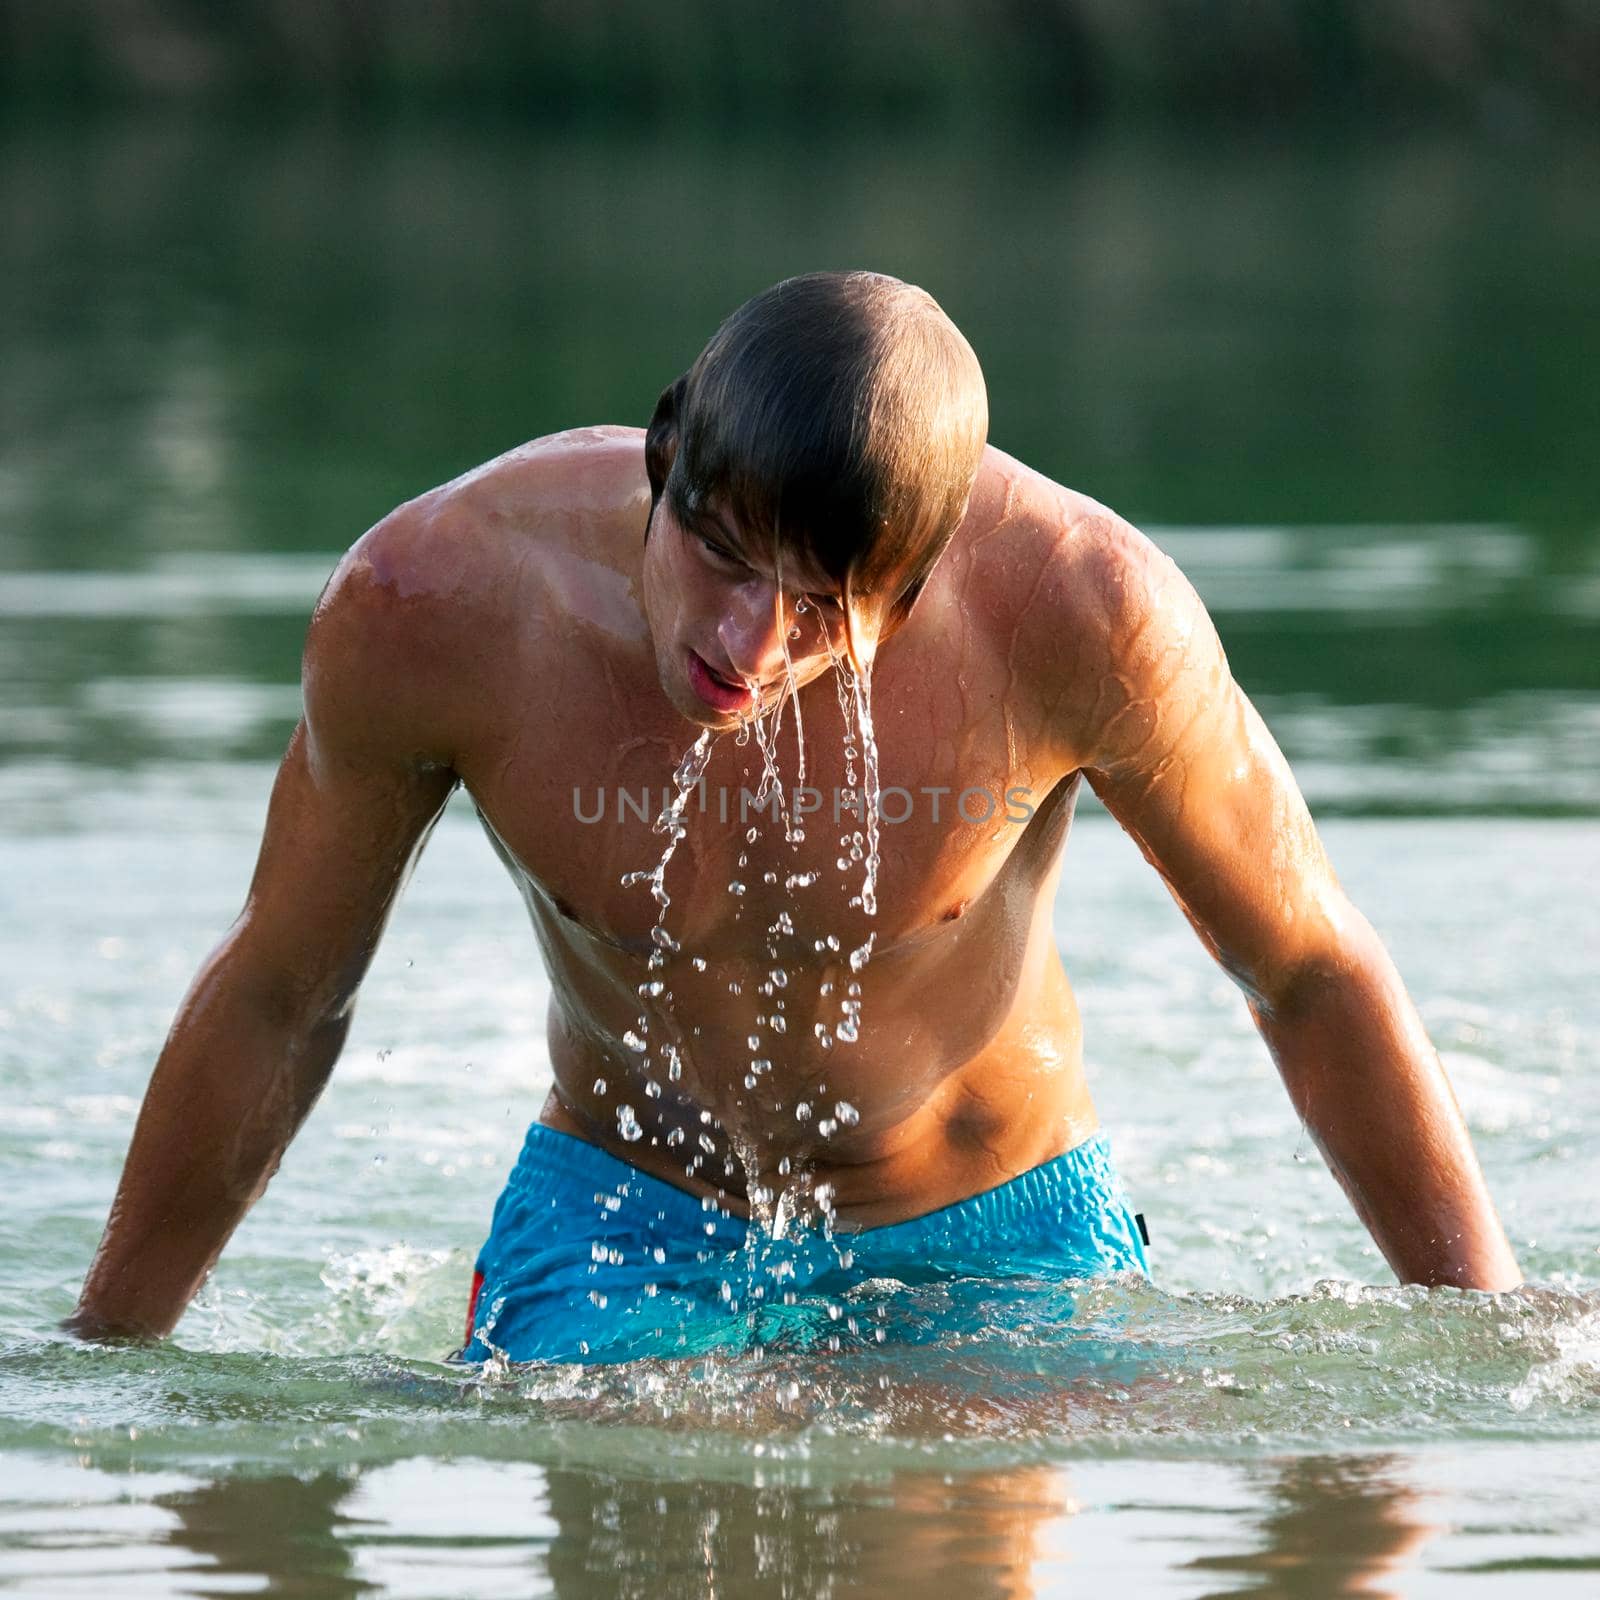 Swimmer getting out of water by Kzenon